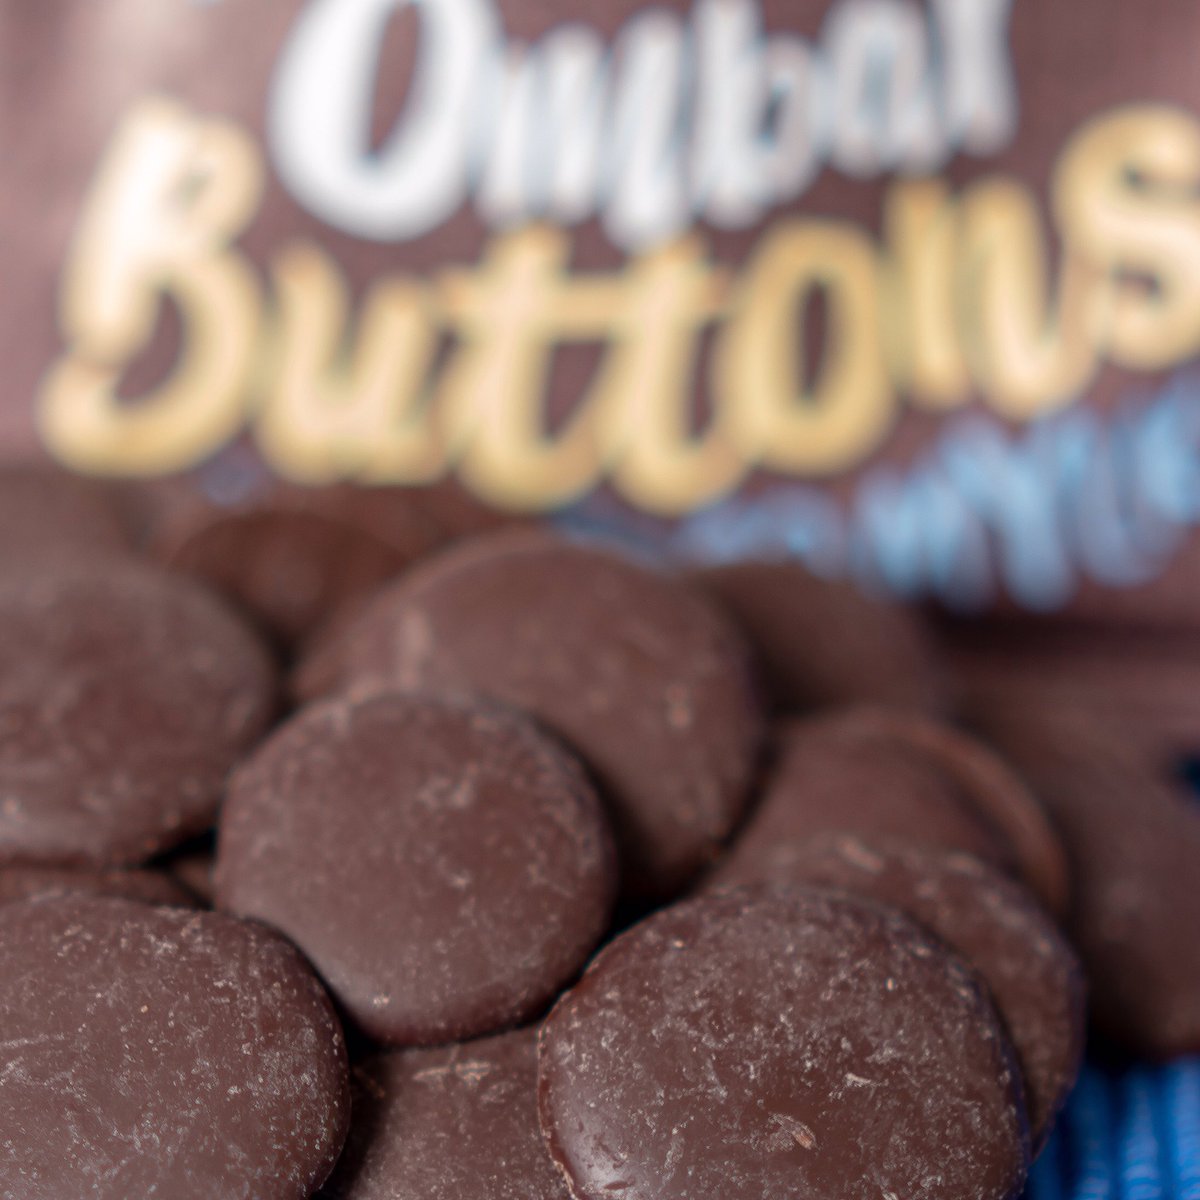 Sunbean stocks delightful, creamy #organic #Ombar #chocolate buttons. They’re #dairyfree, contain #livecultures to help keep your tummy happy & #healthy. Ombar #vegan #chocolatebuttons come in fully #compostable packaging. Pick-up yours for £1.75 at #sunbeancoffee @ombarchocolate